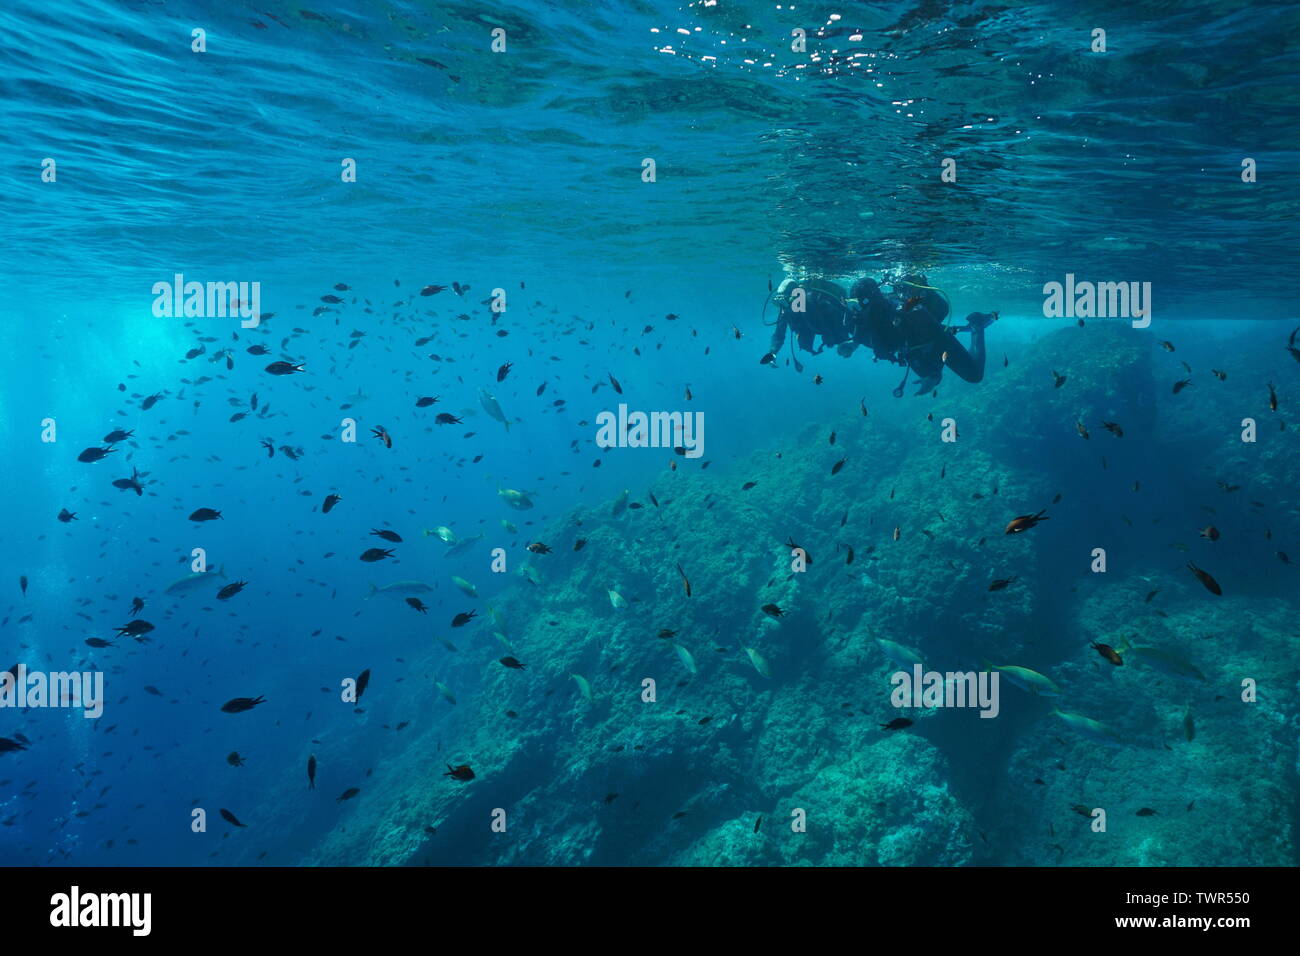 Couple of scuba divers on water surface look at a shoal of fish underwater, Mediterranean sea, Costa Brava, Spain Stock Photo